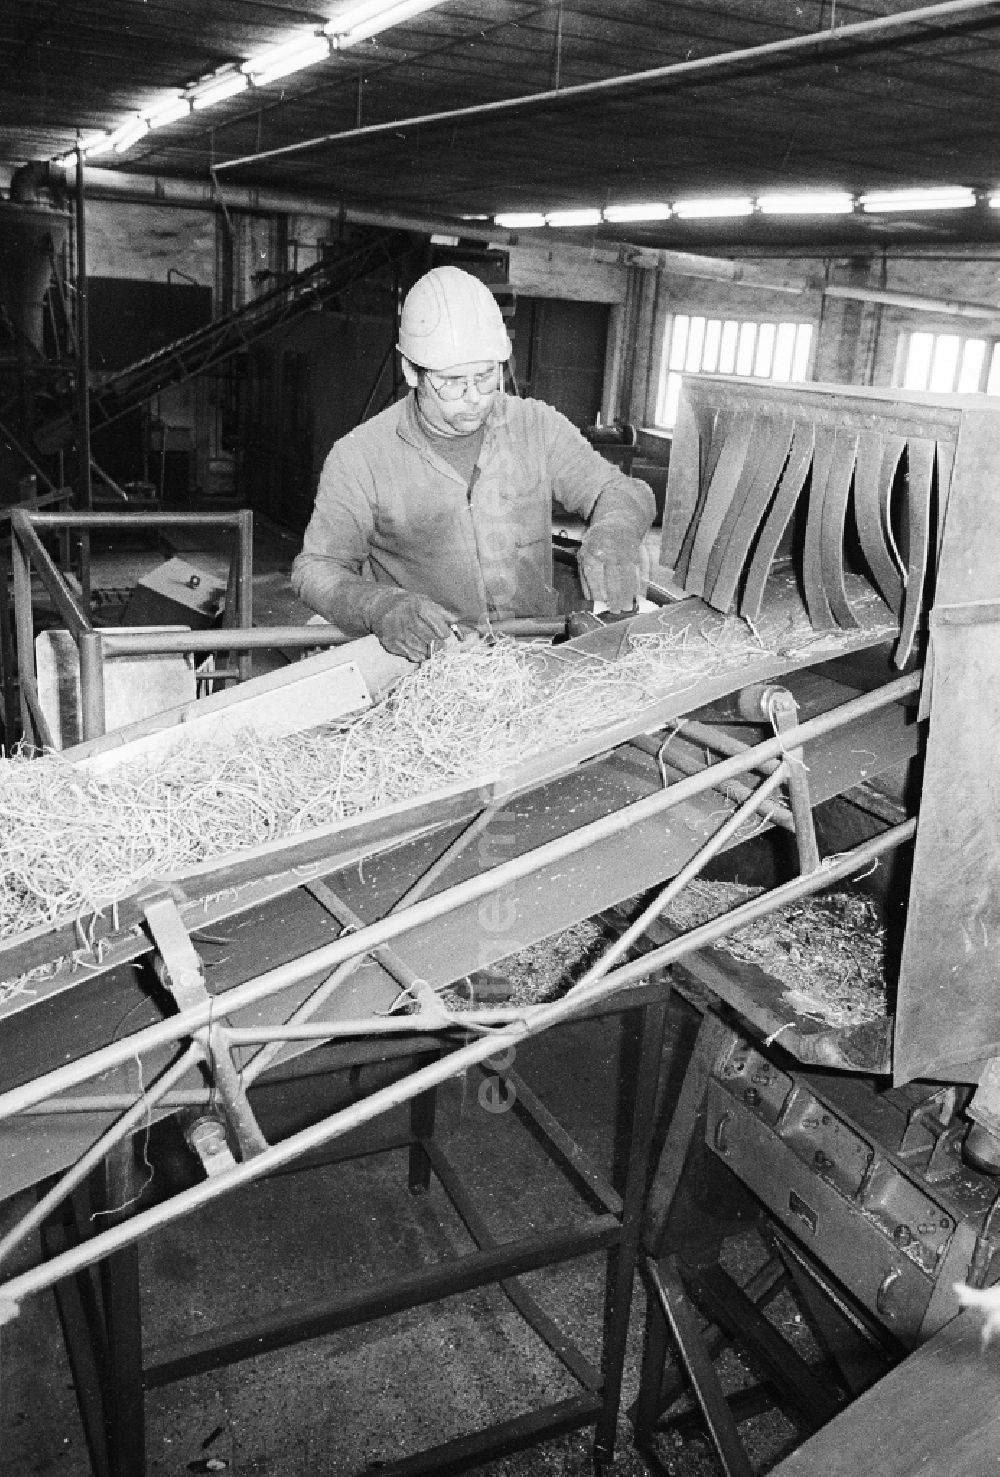 GDR photo archive: Berlin - Valuable material separation in the combine VEB secondary raw material capture (SERO) in Berlin, the former capital of the GDR, German democratic republic. An employee separates valuable metals about a conveyor belt run